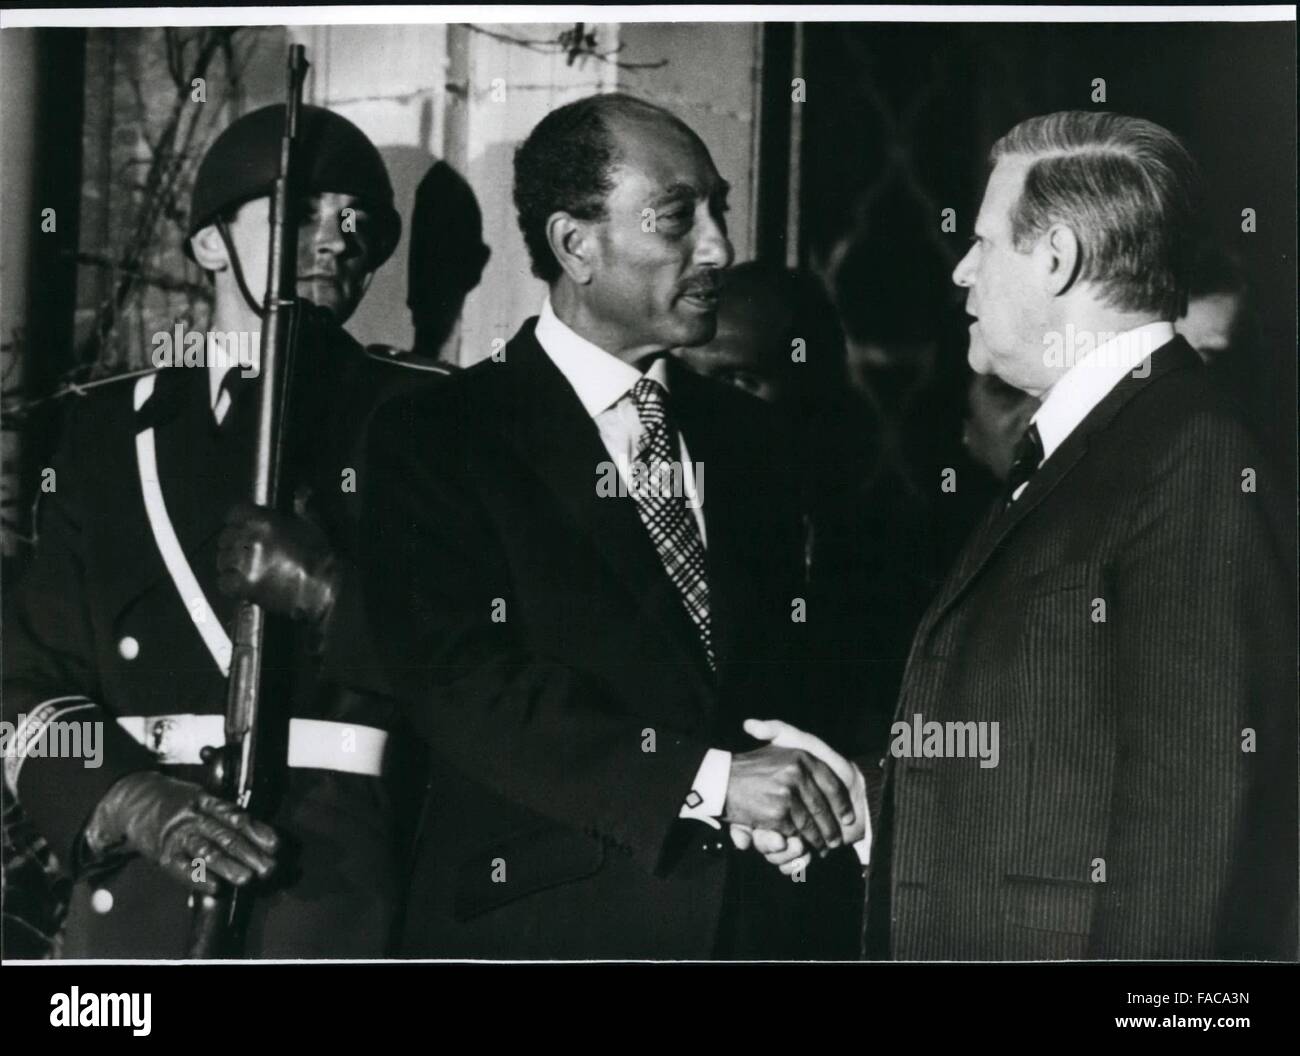 1979 - State Visit of The Egypt State-President Anwar El Sadat In West-Germany After the signing of the peace-treaty between Egypt and Israel with the Israel Prime Minister Begin, at march 26th 1979 in Washington/USA, the Egypt State-President Anwar el Sadat made a intermediate-station from march 29th to 30th 1979 in Bonn/West-Germany. Themes of the talks with Federal President Walter Scheel and Federal Chancellor Helmut Schmidt where the possibilities of the engagement of West-Germany and the Europe Society at the development of the peace in the Near East. Ops: The Egypt State-President Anwar Stock Photo